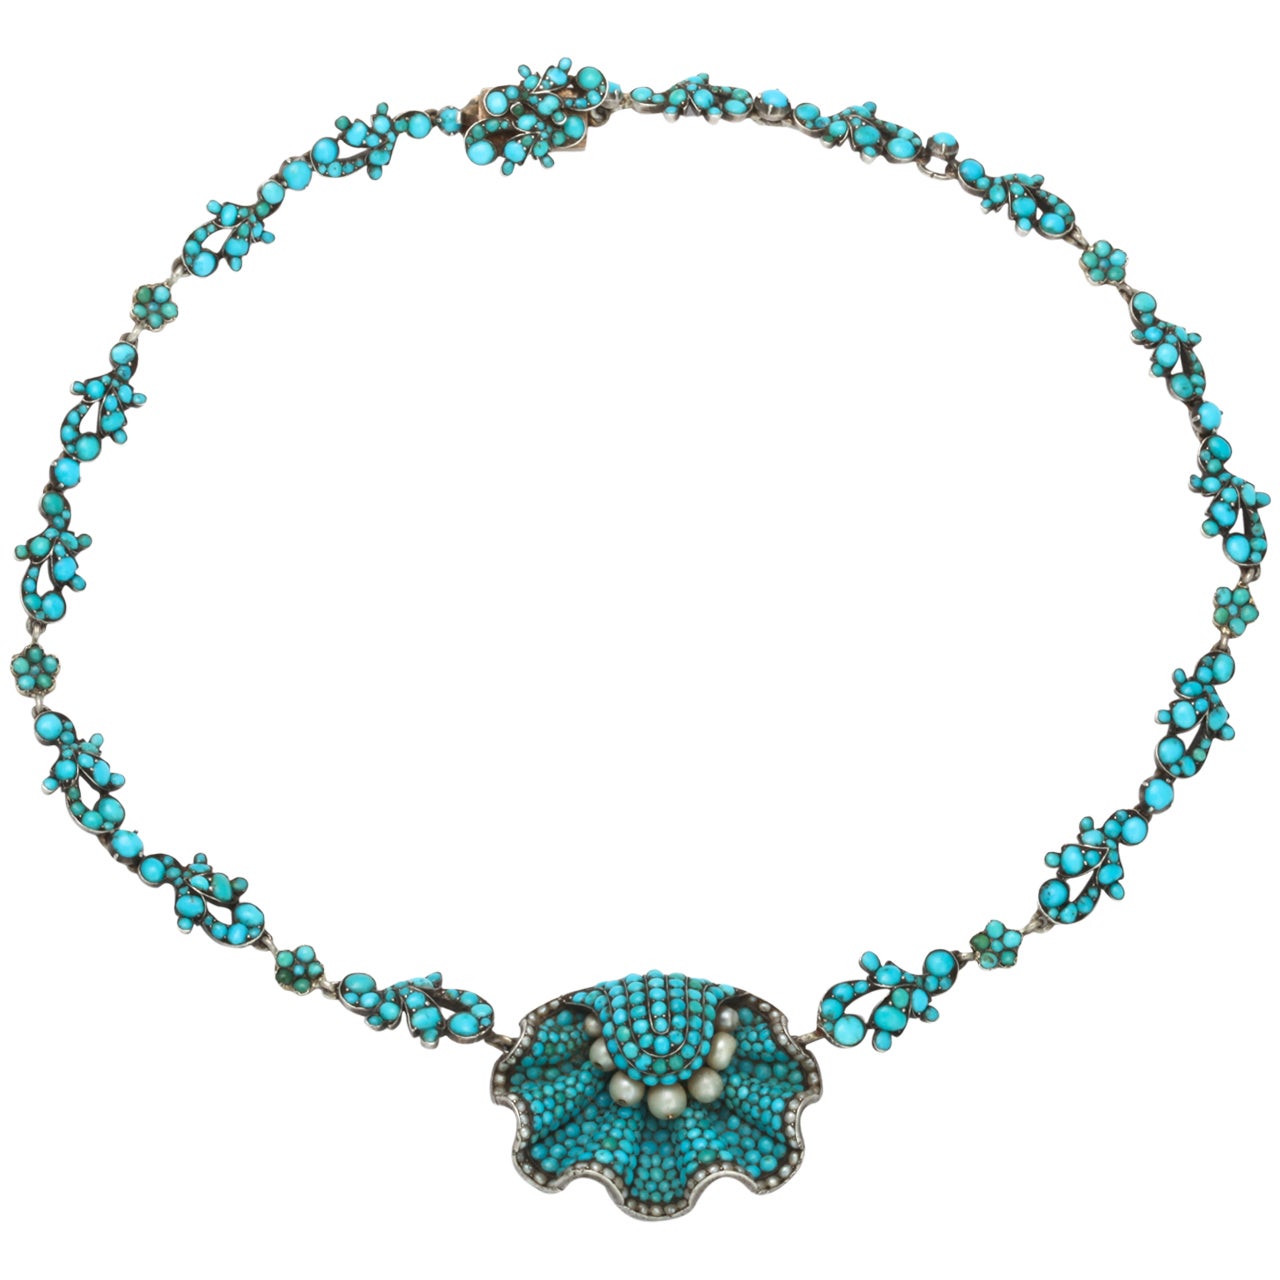 Birth of the Blue: A Magnificent Turquoise and Natural Pearl Necklace